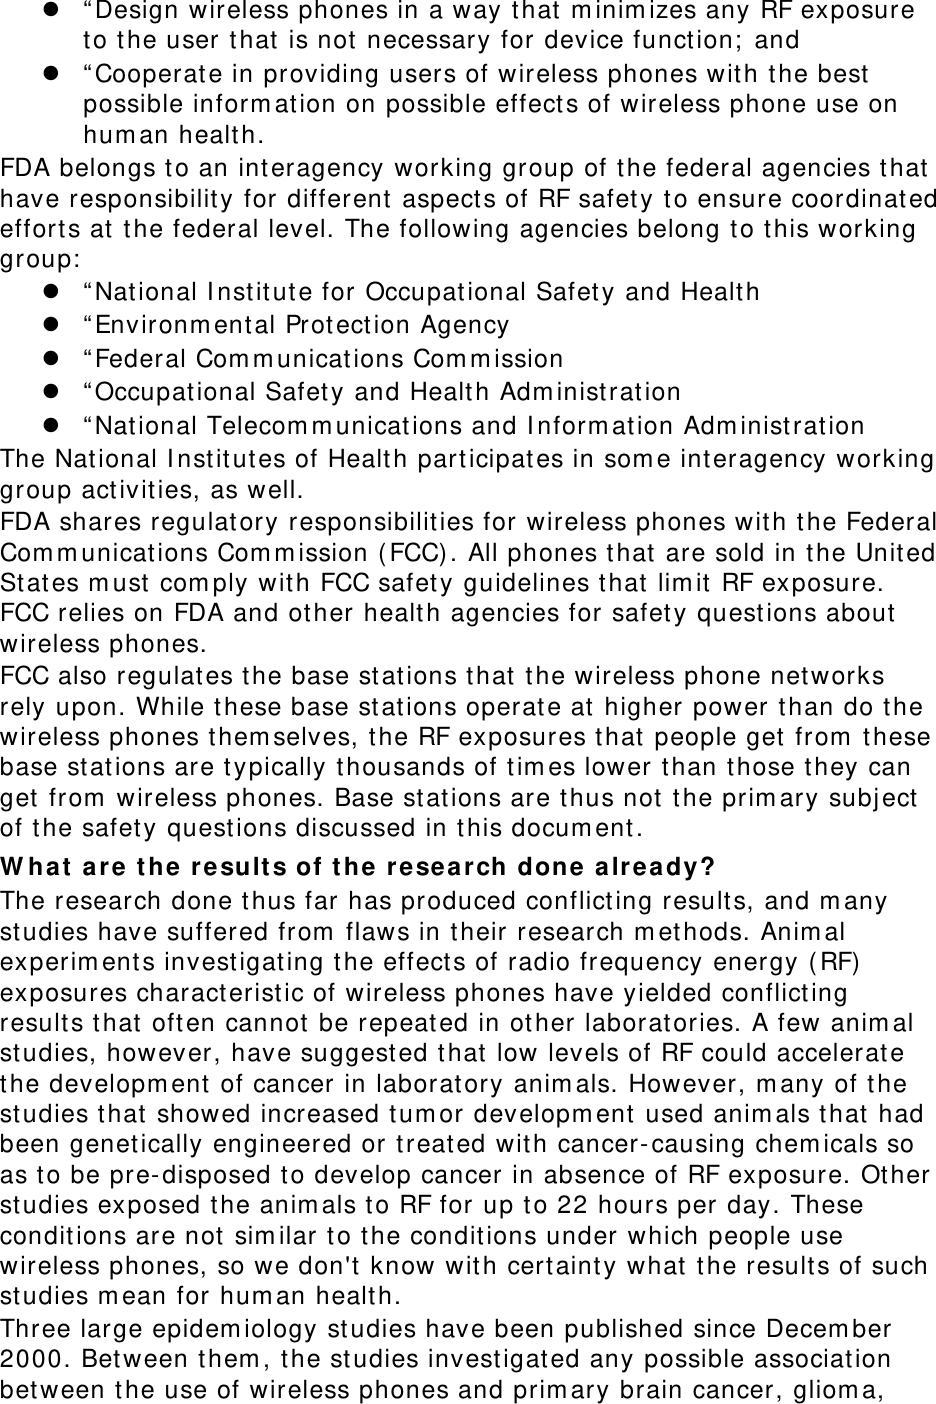  “ Design wireless phones in a way that  m inim izes any RF exposure to the user t hat  is not necessary for device funct ion;  and  “ Cooperate in providing users of wireless phones wit h t he best  possible inform ation on possible effect s of wireless phone use on hum an healt h. FDA belongs t o an interagency working group of the federal agencies t hat have responsibility for different  aspect s of RF safety t o ensure coordinat ed effort s at t he federal level. The following agencies belong t o t his working group:   “ Nat ional I nst it ut e for Occupational Safet y and Healt h  “ Environm ent al Prot ect ion Agency  “ Federal Com m unications Com m ission  “ Occupational Safety and Healt h Adm inist ration  “ Nat ional Telecom m unicat ions and I nform at ion Adm inist ration The National I nst itutes of Healt h part icipat es in som e int eragency working group activit ies, as well. FDA shares regulatory responsibilit ies for wireless phones with t he Federal Com m unicat ions Com m ission ( FCC). All phones t hat are sold in t he Unit ed St at es m ust com ply with FCC safety guidelines t hat lim it RF exposure. FCC relies on FDA and other healt h agencies for safet y quest ions about wireless phones. FCC also regulat es t he base st ations t hat the wireless phone networks rely upon. While t hese base st at ions operate at higher power t han do t he wireless phones them selves, t he RF exposures t hat  people get from  these base st at ions are t ypically thousands of tim es lower than t hose t hey can get from  wireless phones. Base st at ions are t hus not  t he prim ary subject  of t he safety quest ions discussed in t his docum ent . W ha t  a r e  the r e sults of t he  rese a r ch don e  alrea dy? The research done t hus far has produced conflict ing results, and m any studies have suffered from  flaws in t heir research m et hods. Anim al experim ent s invest igating t he effect s of radio frequency energy (RF)  exposures charact erist ic of wireless phones have yielded conflict ing result s t hat oft en cannot  be repeat ed in other laborat ories. A few anim al studies, however, have suggest ed t hat low levels of RF could accelerat e the developm ent of cancer in laborat ory anim als. However, m any of the studies t hat showed increased tum or developm ent used anim als t hat had been genetically engineered or t reat ed wit h cancer- causing chem icals so as to be pre-disposed to develop cancer in absence of RF exposure. Other studies exposed t he anim als t o RF for up to 22 hours per day. These conditions are not sim ilar to the conditions under which people use wireless phones, so we don&apos;t  know with cert ainty what  t he results of such studies m ean for hum an healt h. Three large epidem iology studies have been published since Decem ber 2000. Between t hem , the st udies invest igat ed any possible association between the use of wireless phones and prim ary brain cancer, gliom a, 